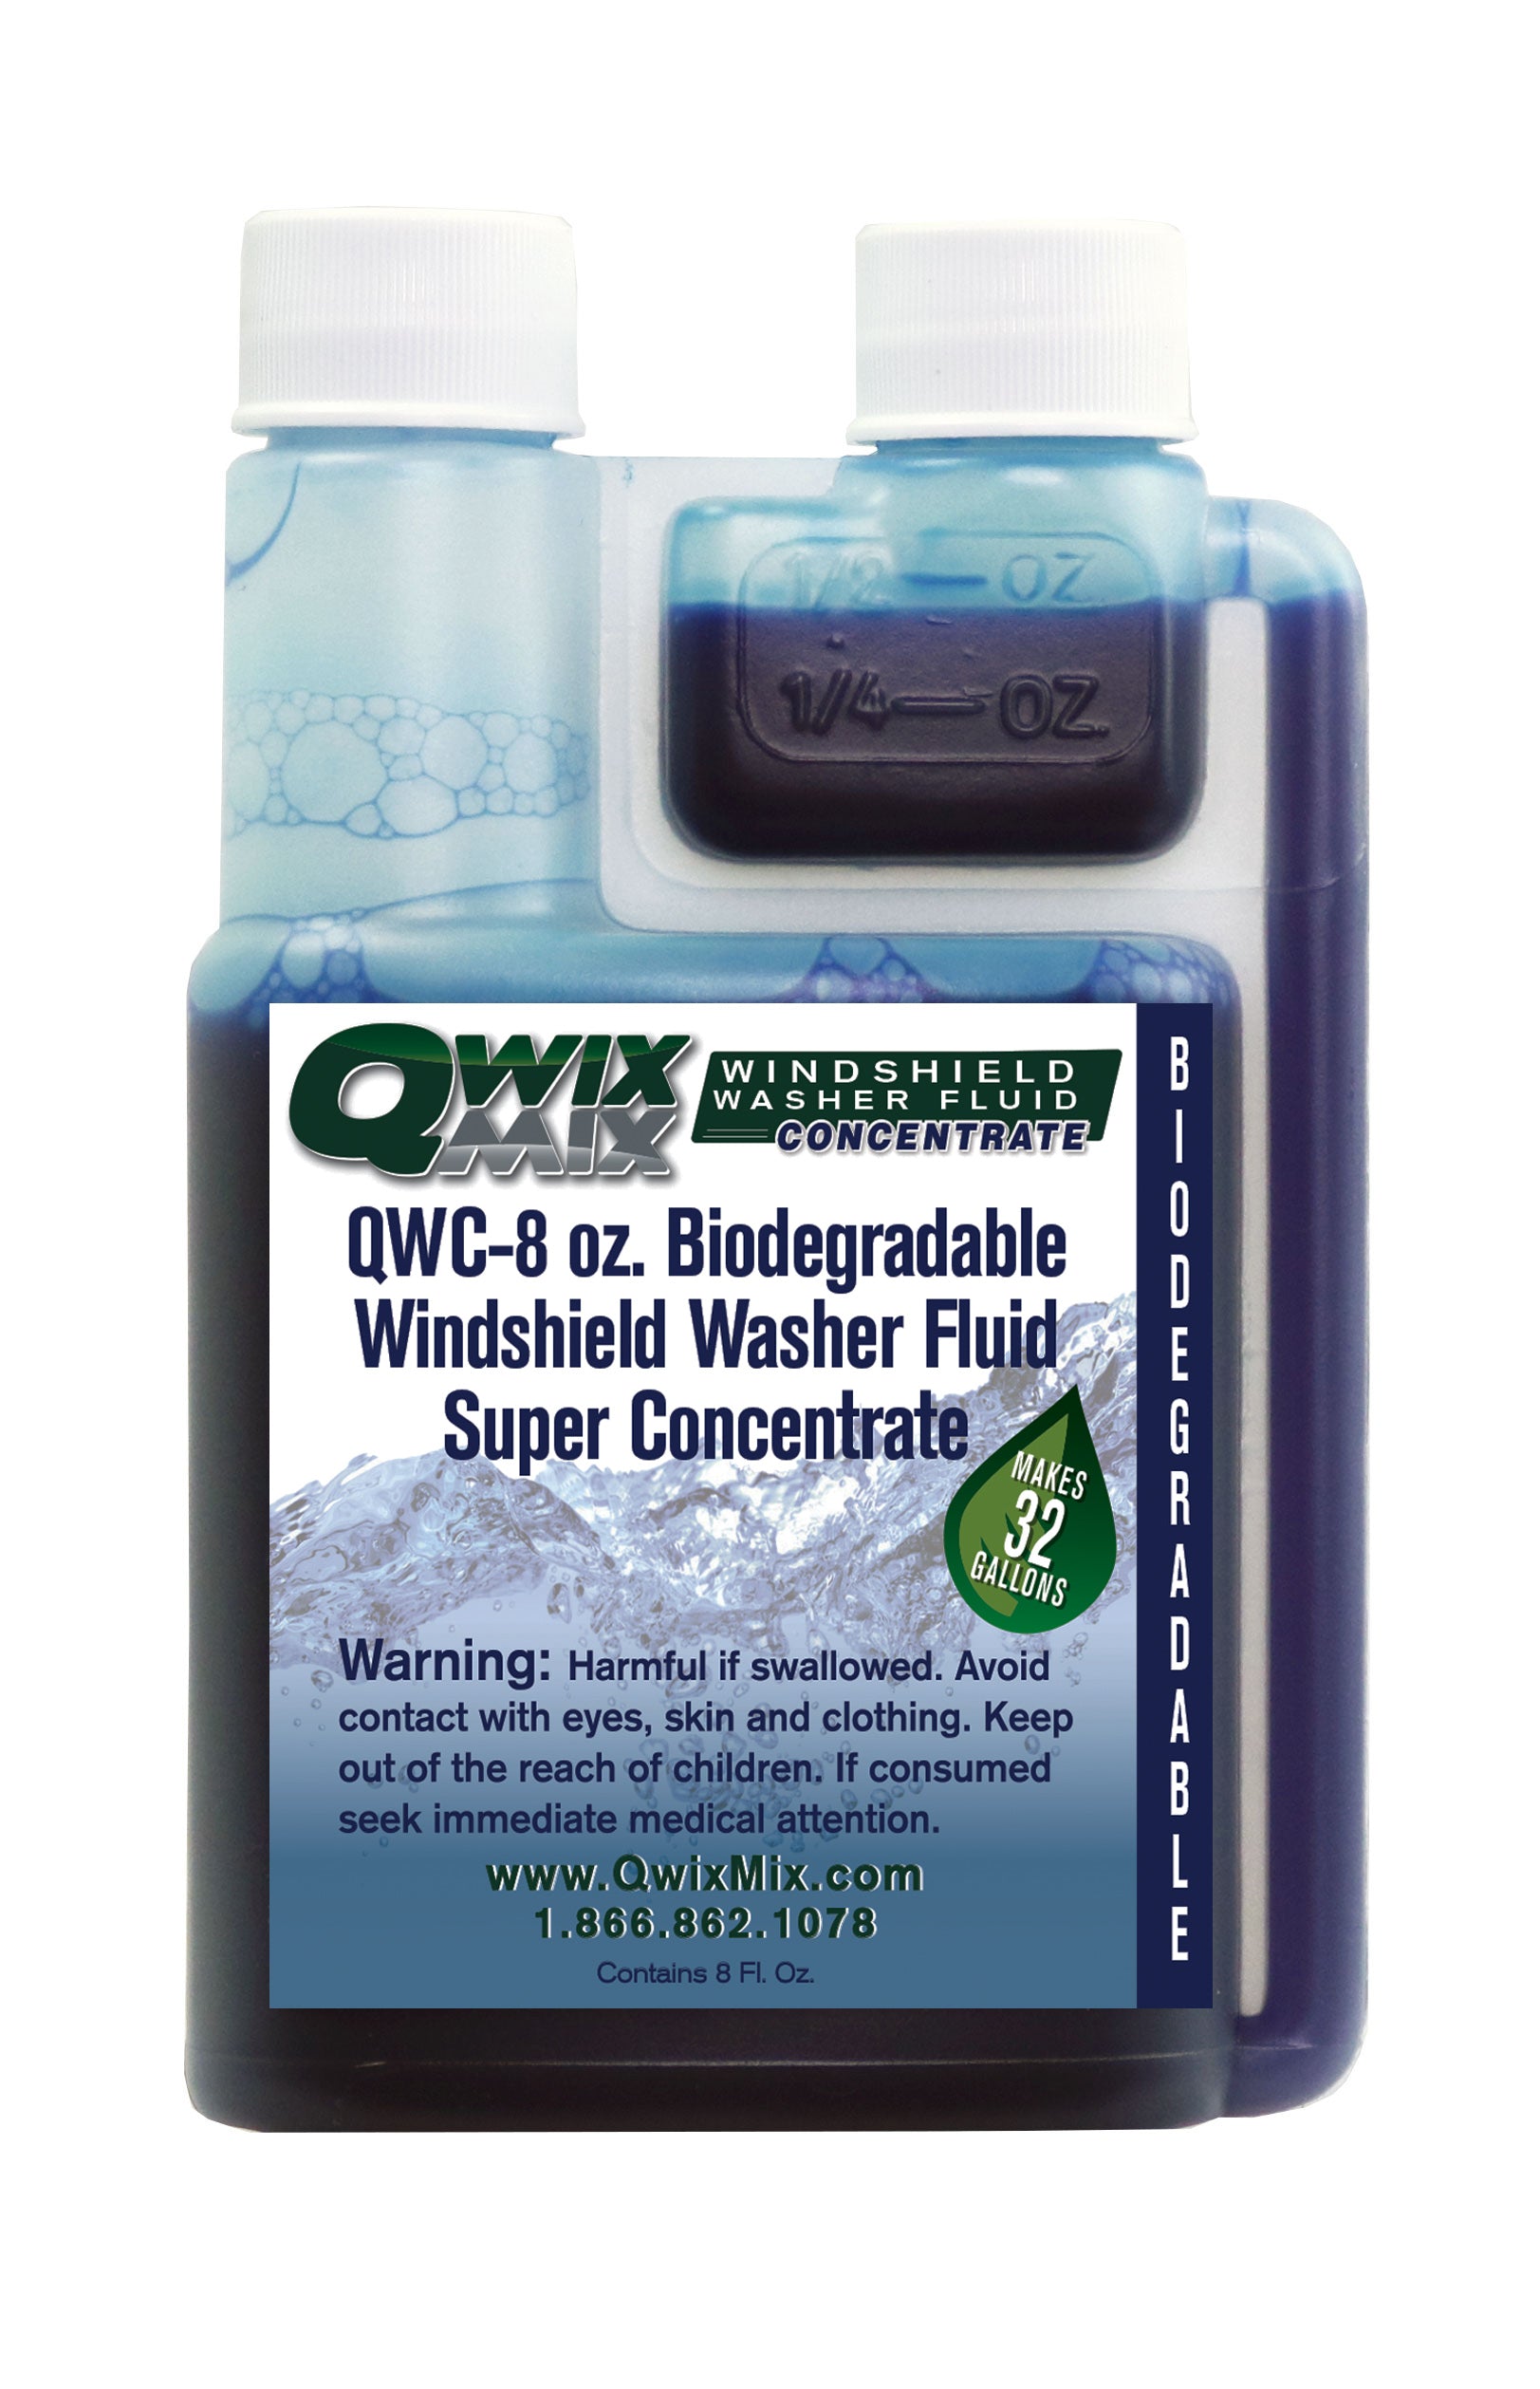 QWC-1G Biodegradable Windshield Washer Fluid Concentrate